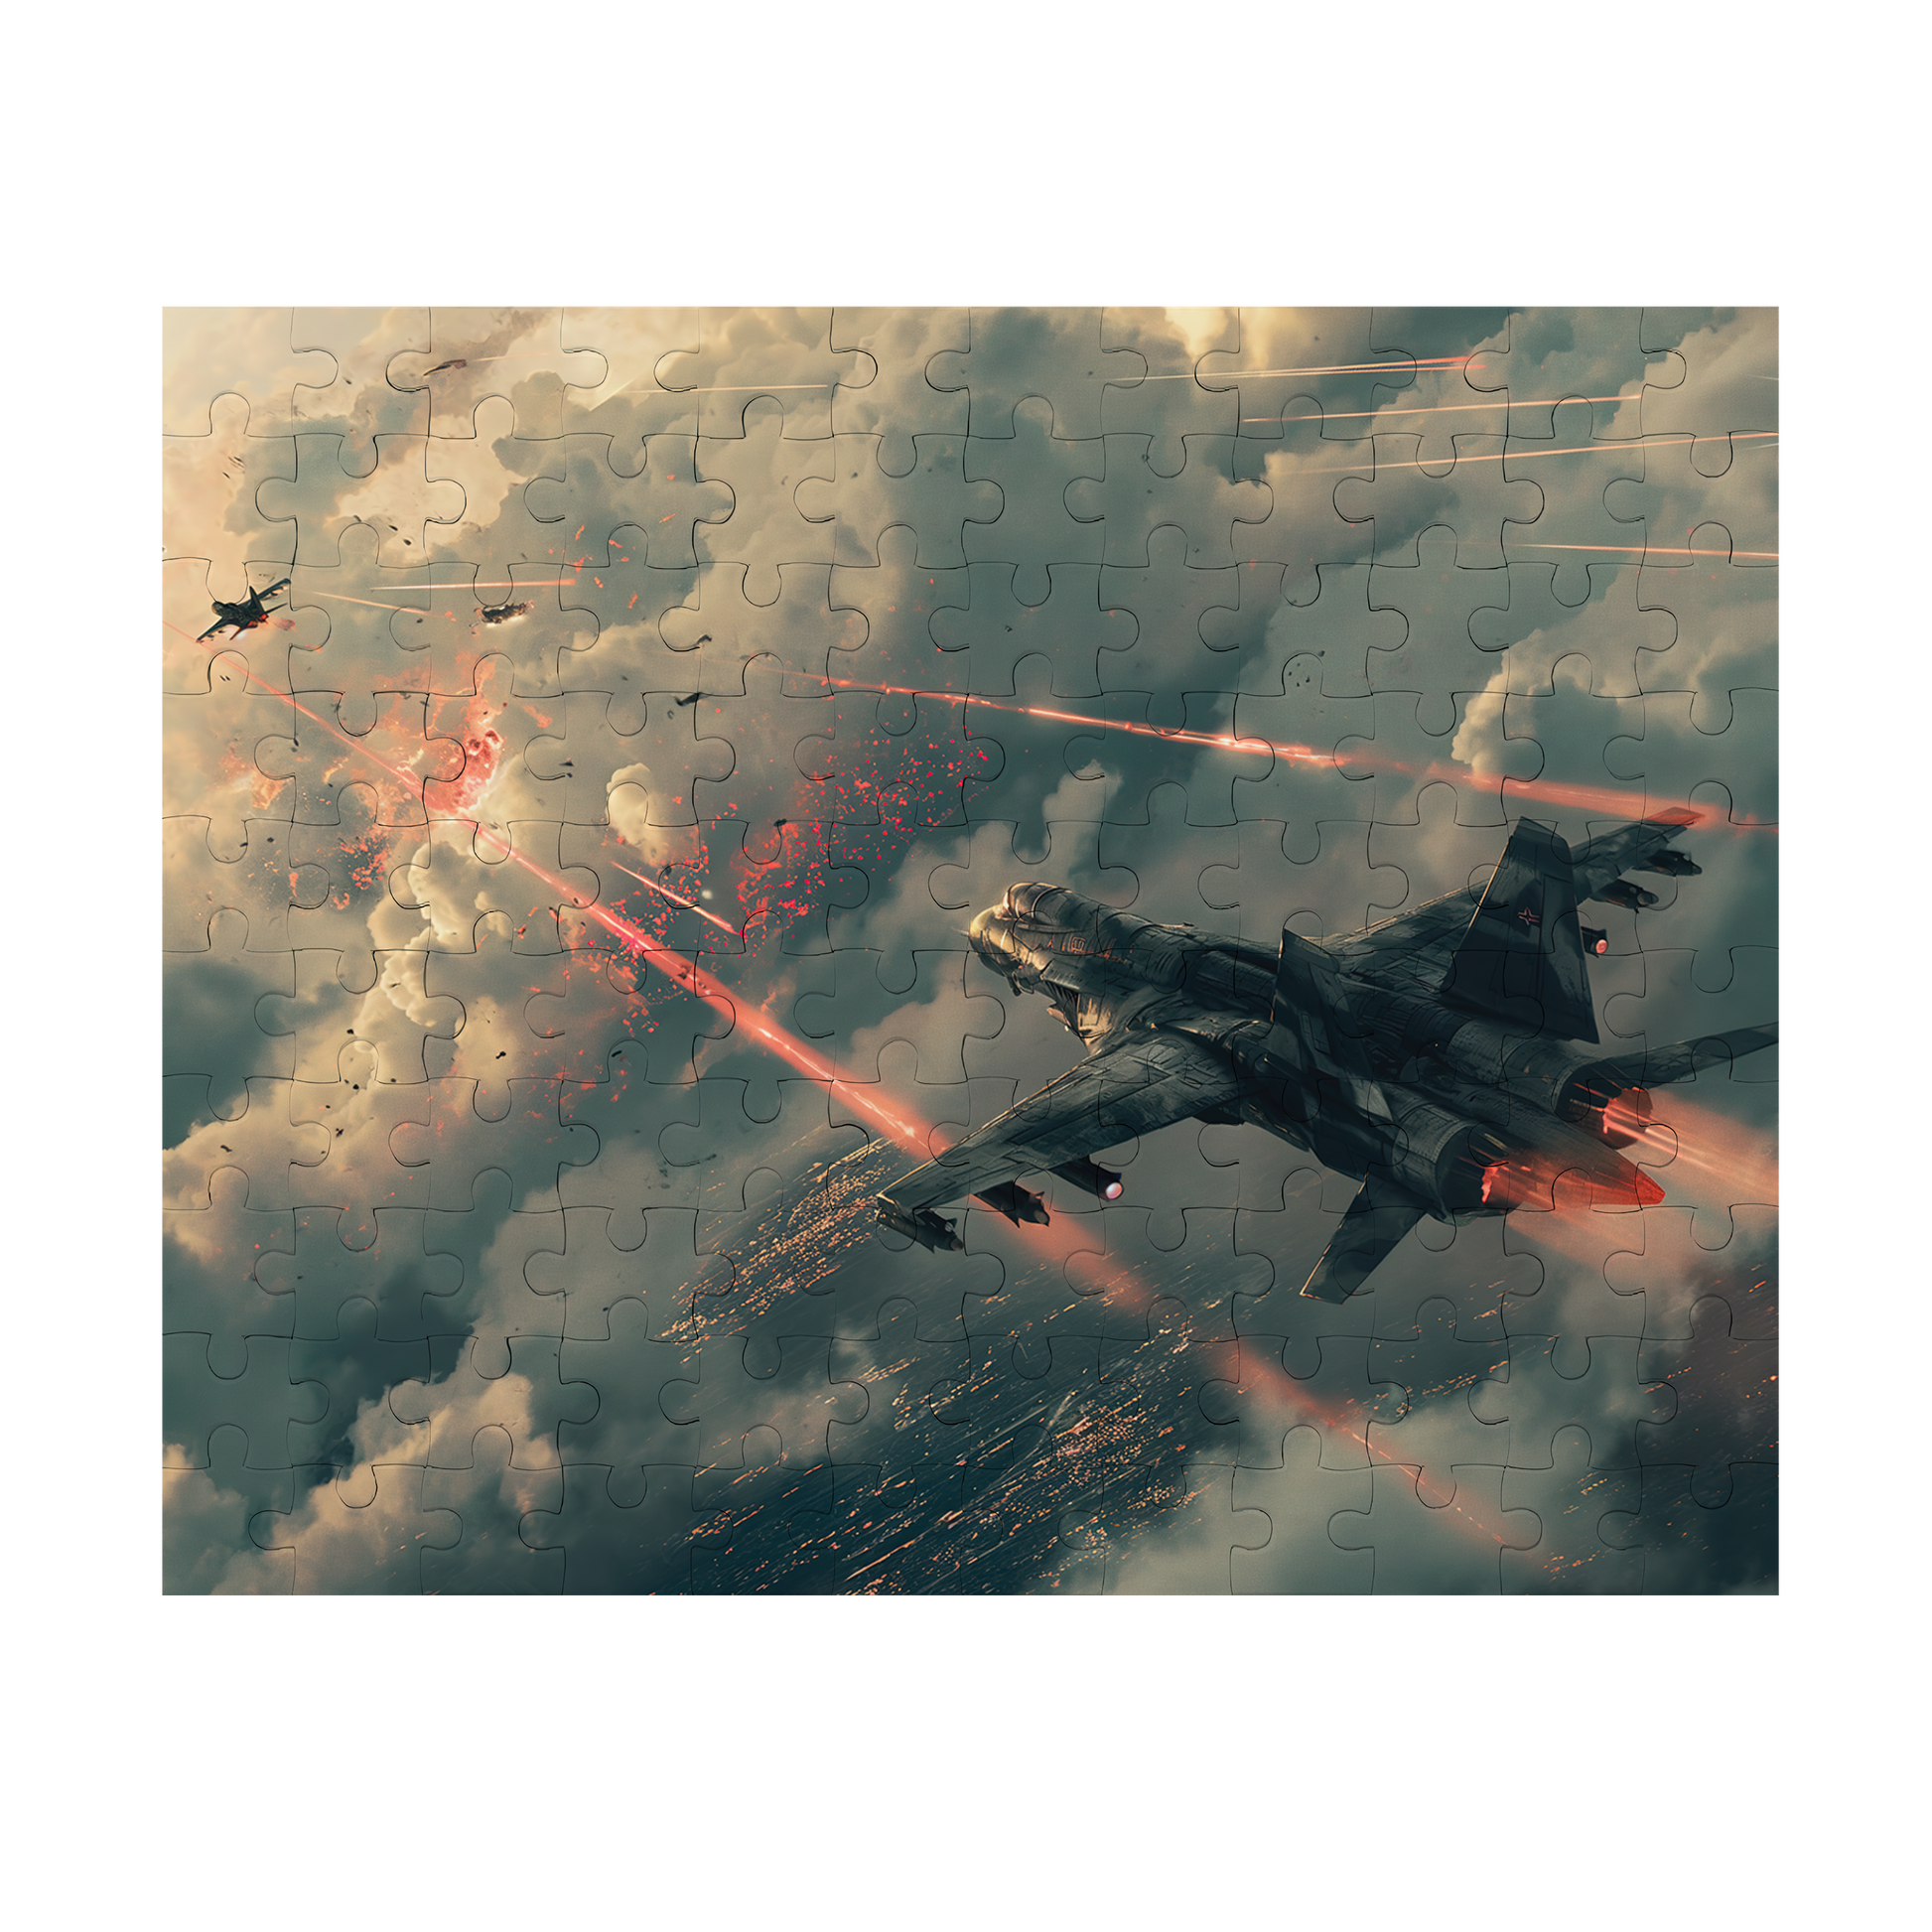 Engagement - Premium Jigsaw Puzzle - Aerial Combat, Action Packed, Modern - Multiple Sizes Available